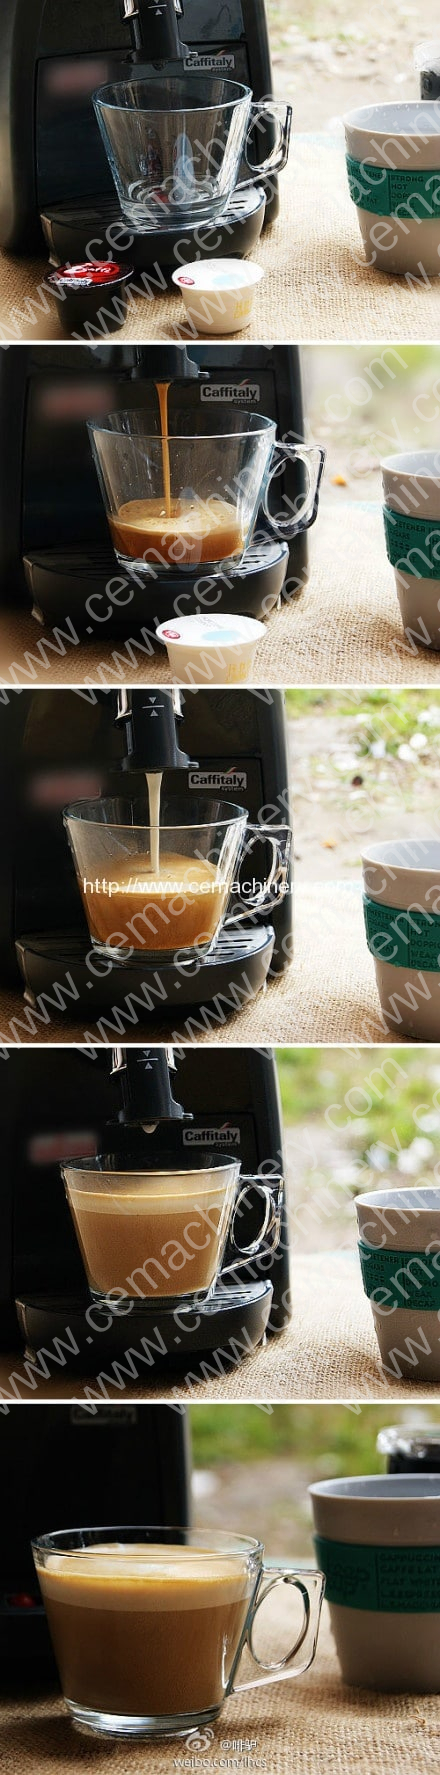 Introduction about Caffitaly and K-FEE(Starbucks Verismo) 1